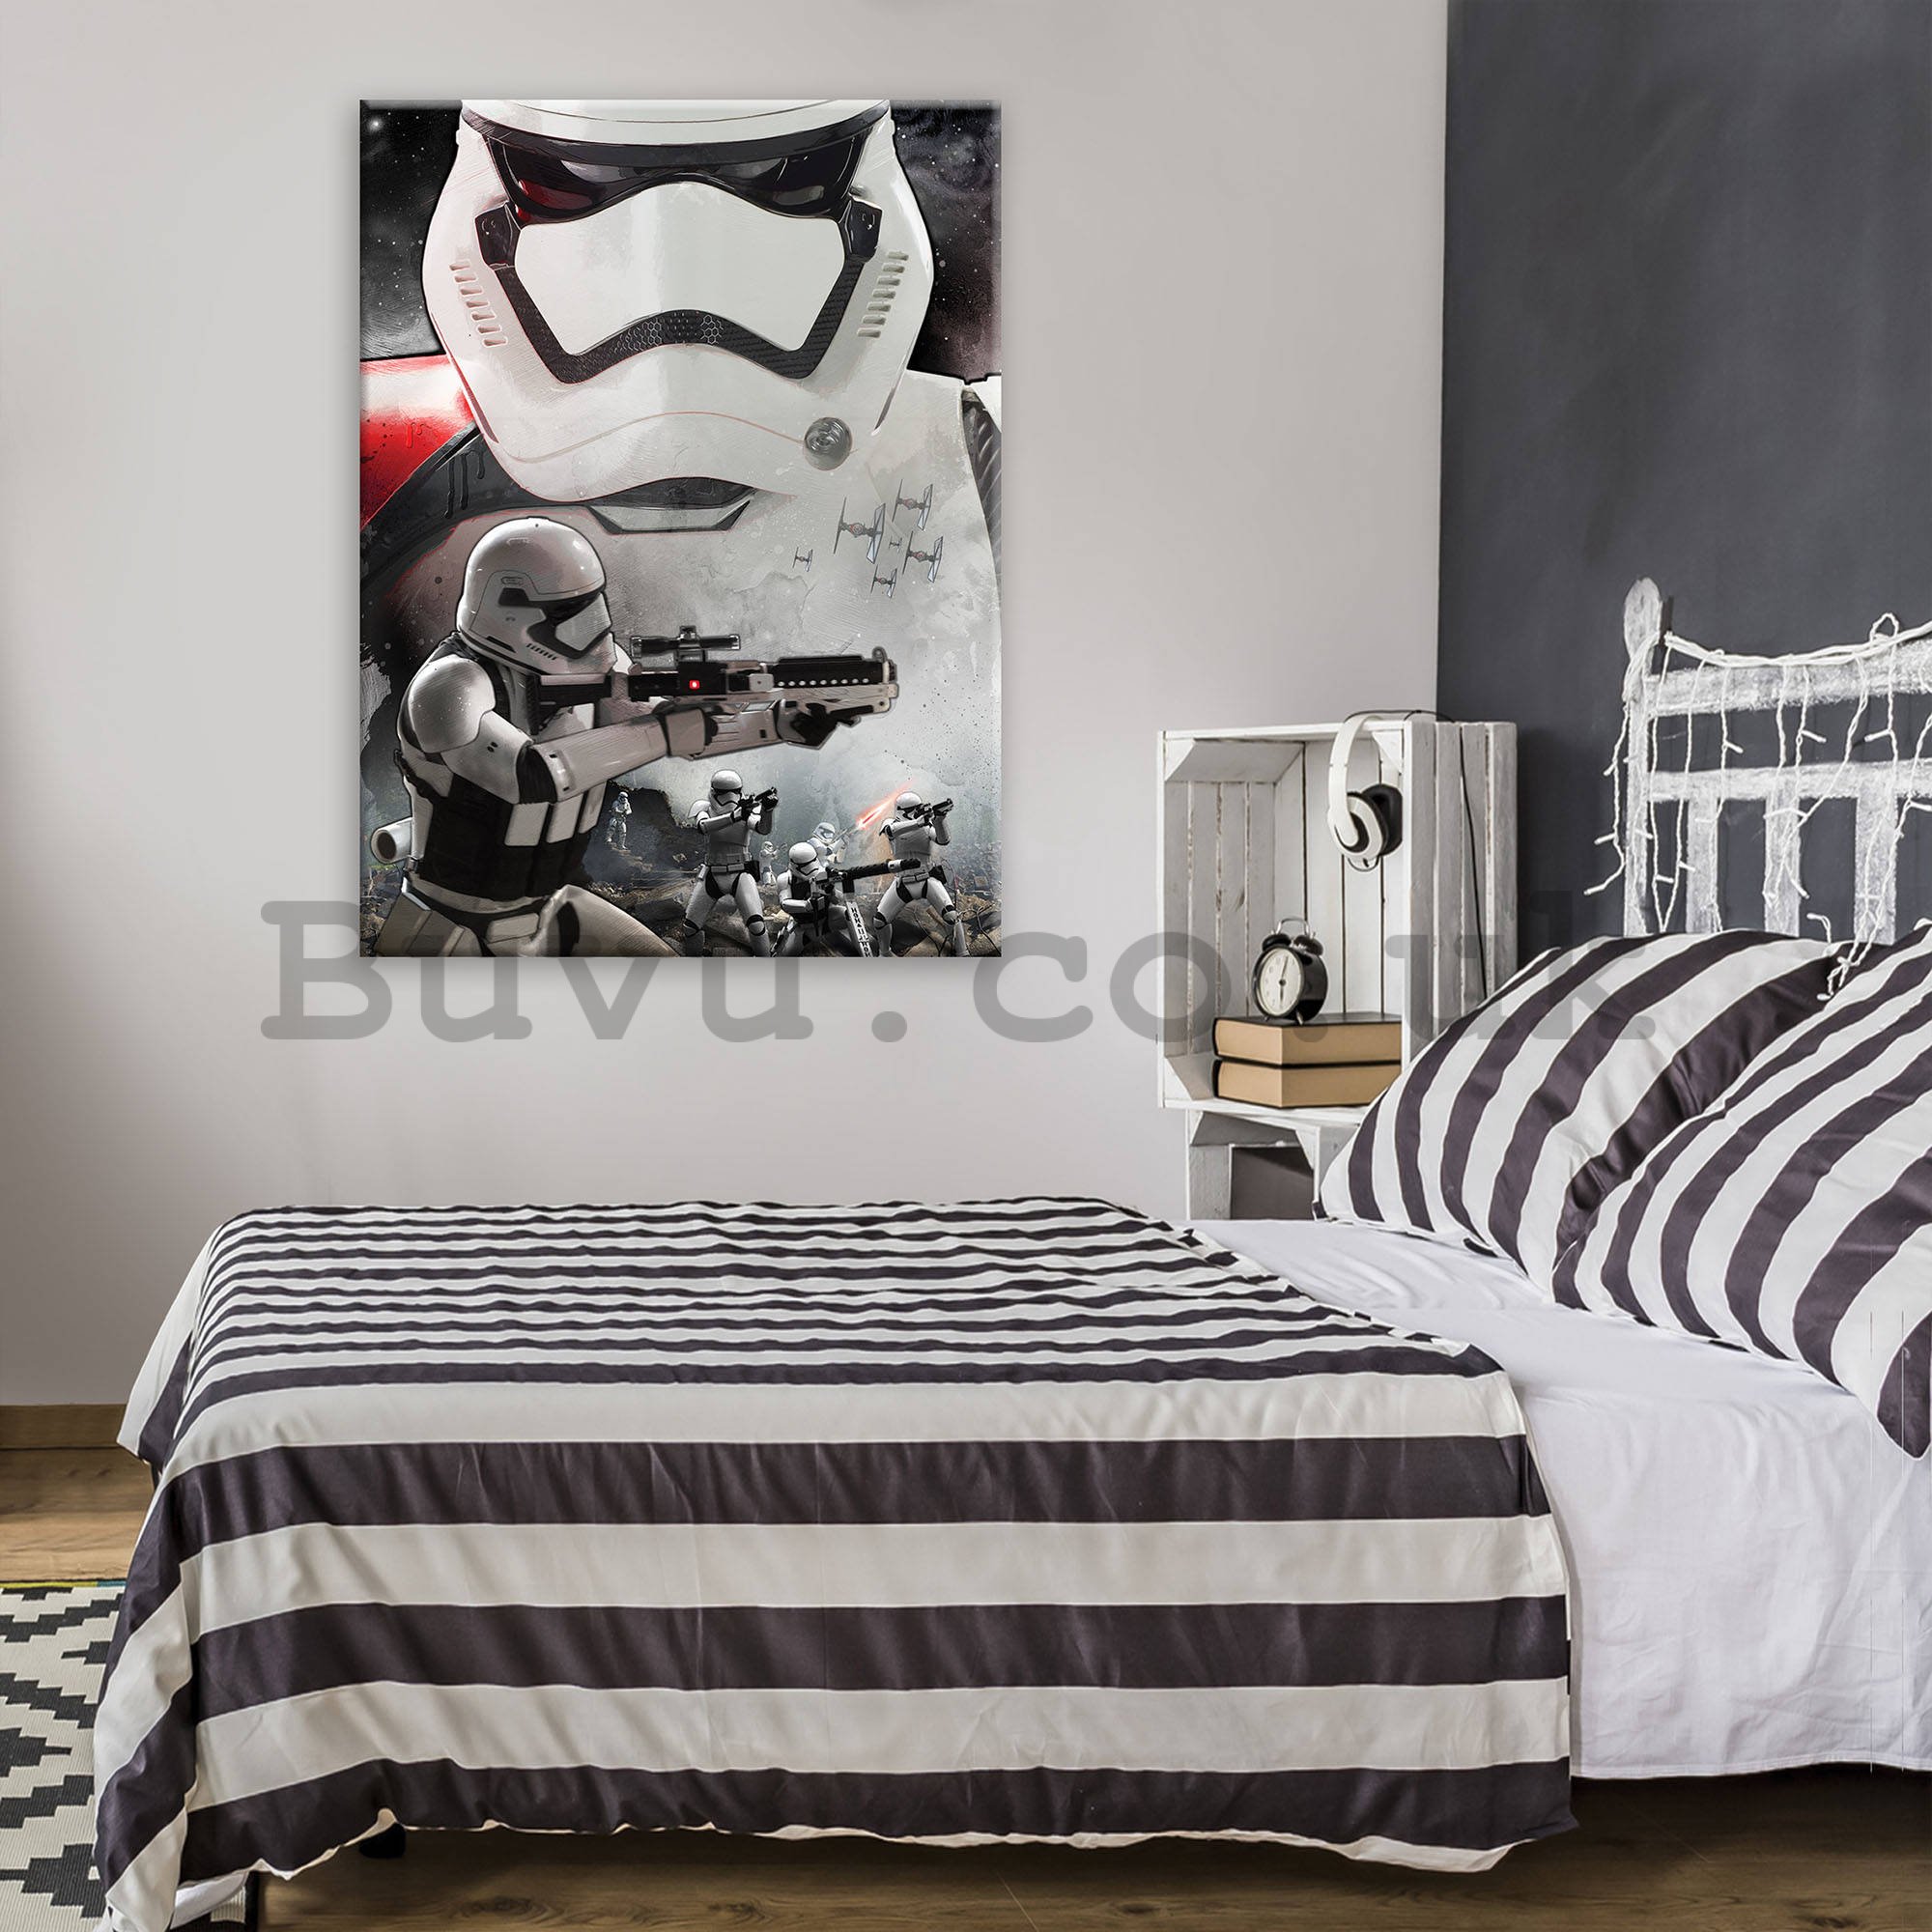 Painting on canvas: Star Wars Stormtrooper (First Order) - 100x75 cm